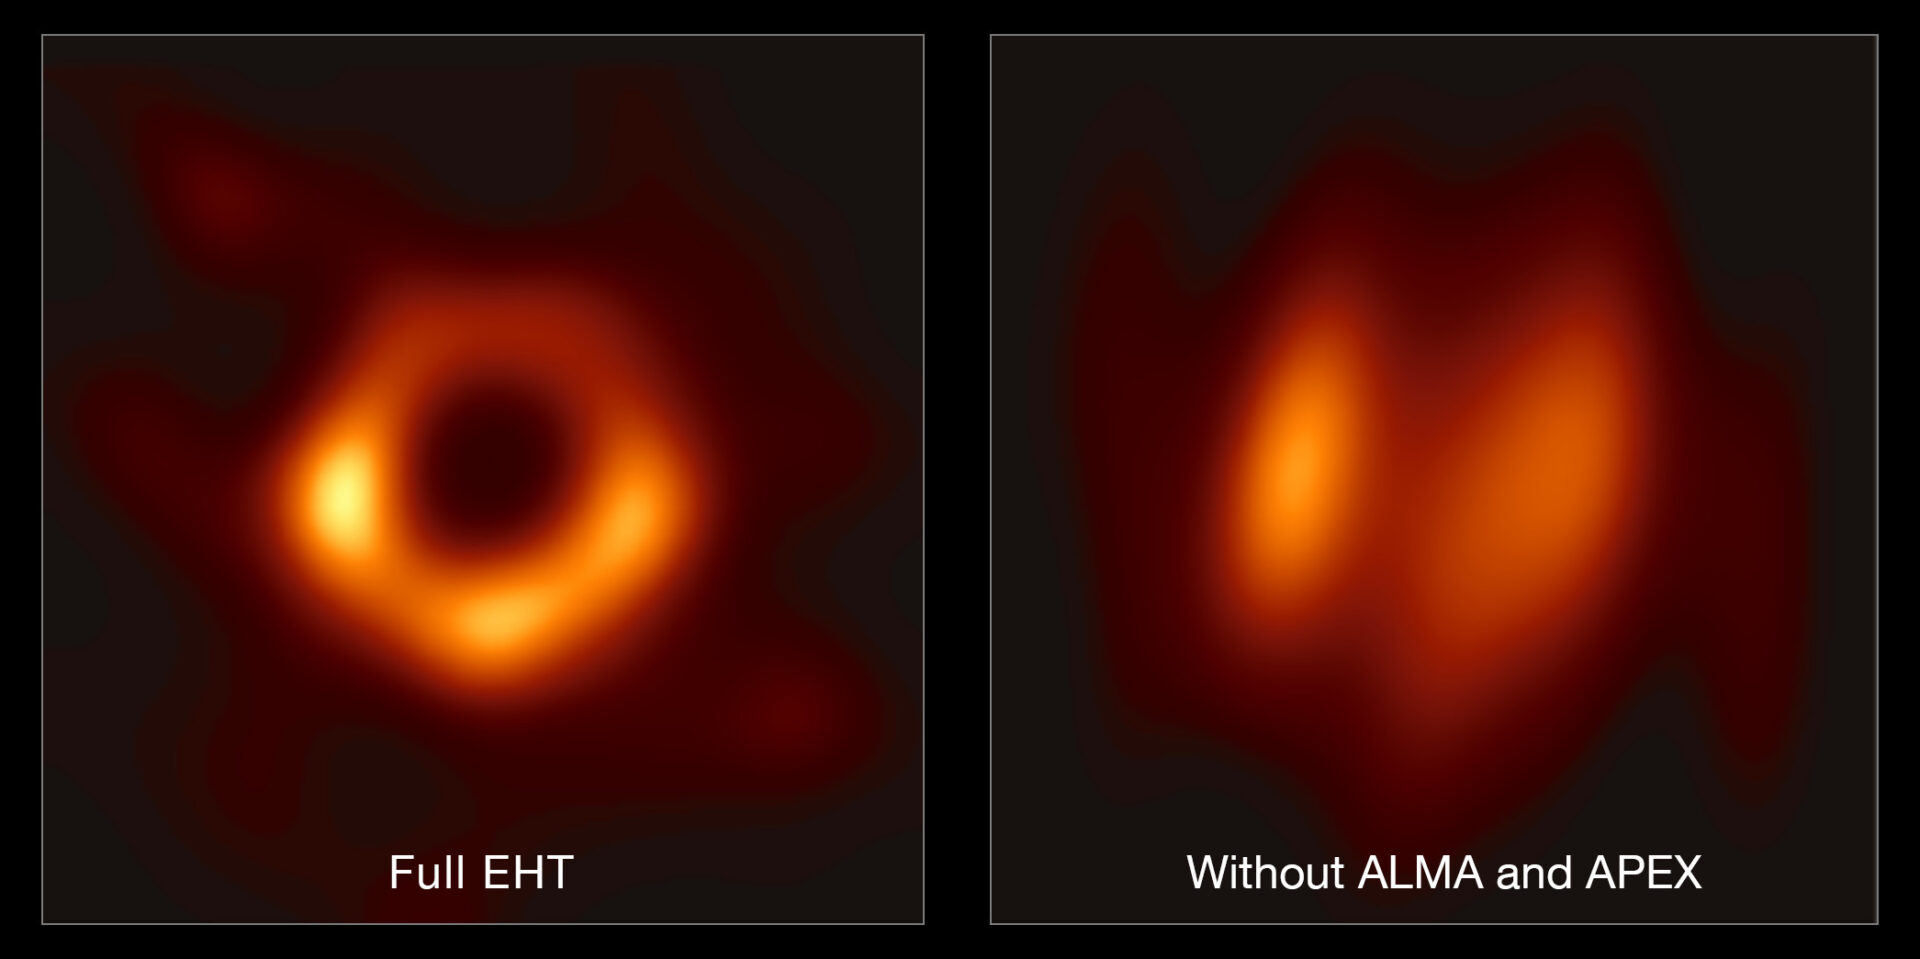 This image shows the contribution of ALMA and APEX to the EHT. The left hand image shows a reconstruction of the black hole image using the full array of the Event Horizon Telescope (including ALMA and APEX); the right-hand image shows what the reconstruction would look like without data from ALMA and APEX. The difference clearly shows the crucial role that ALMA and APEX played in the observations. Credit: EHT Collaboration